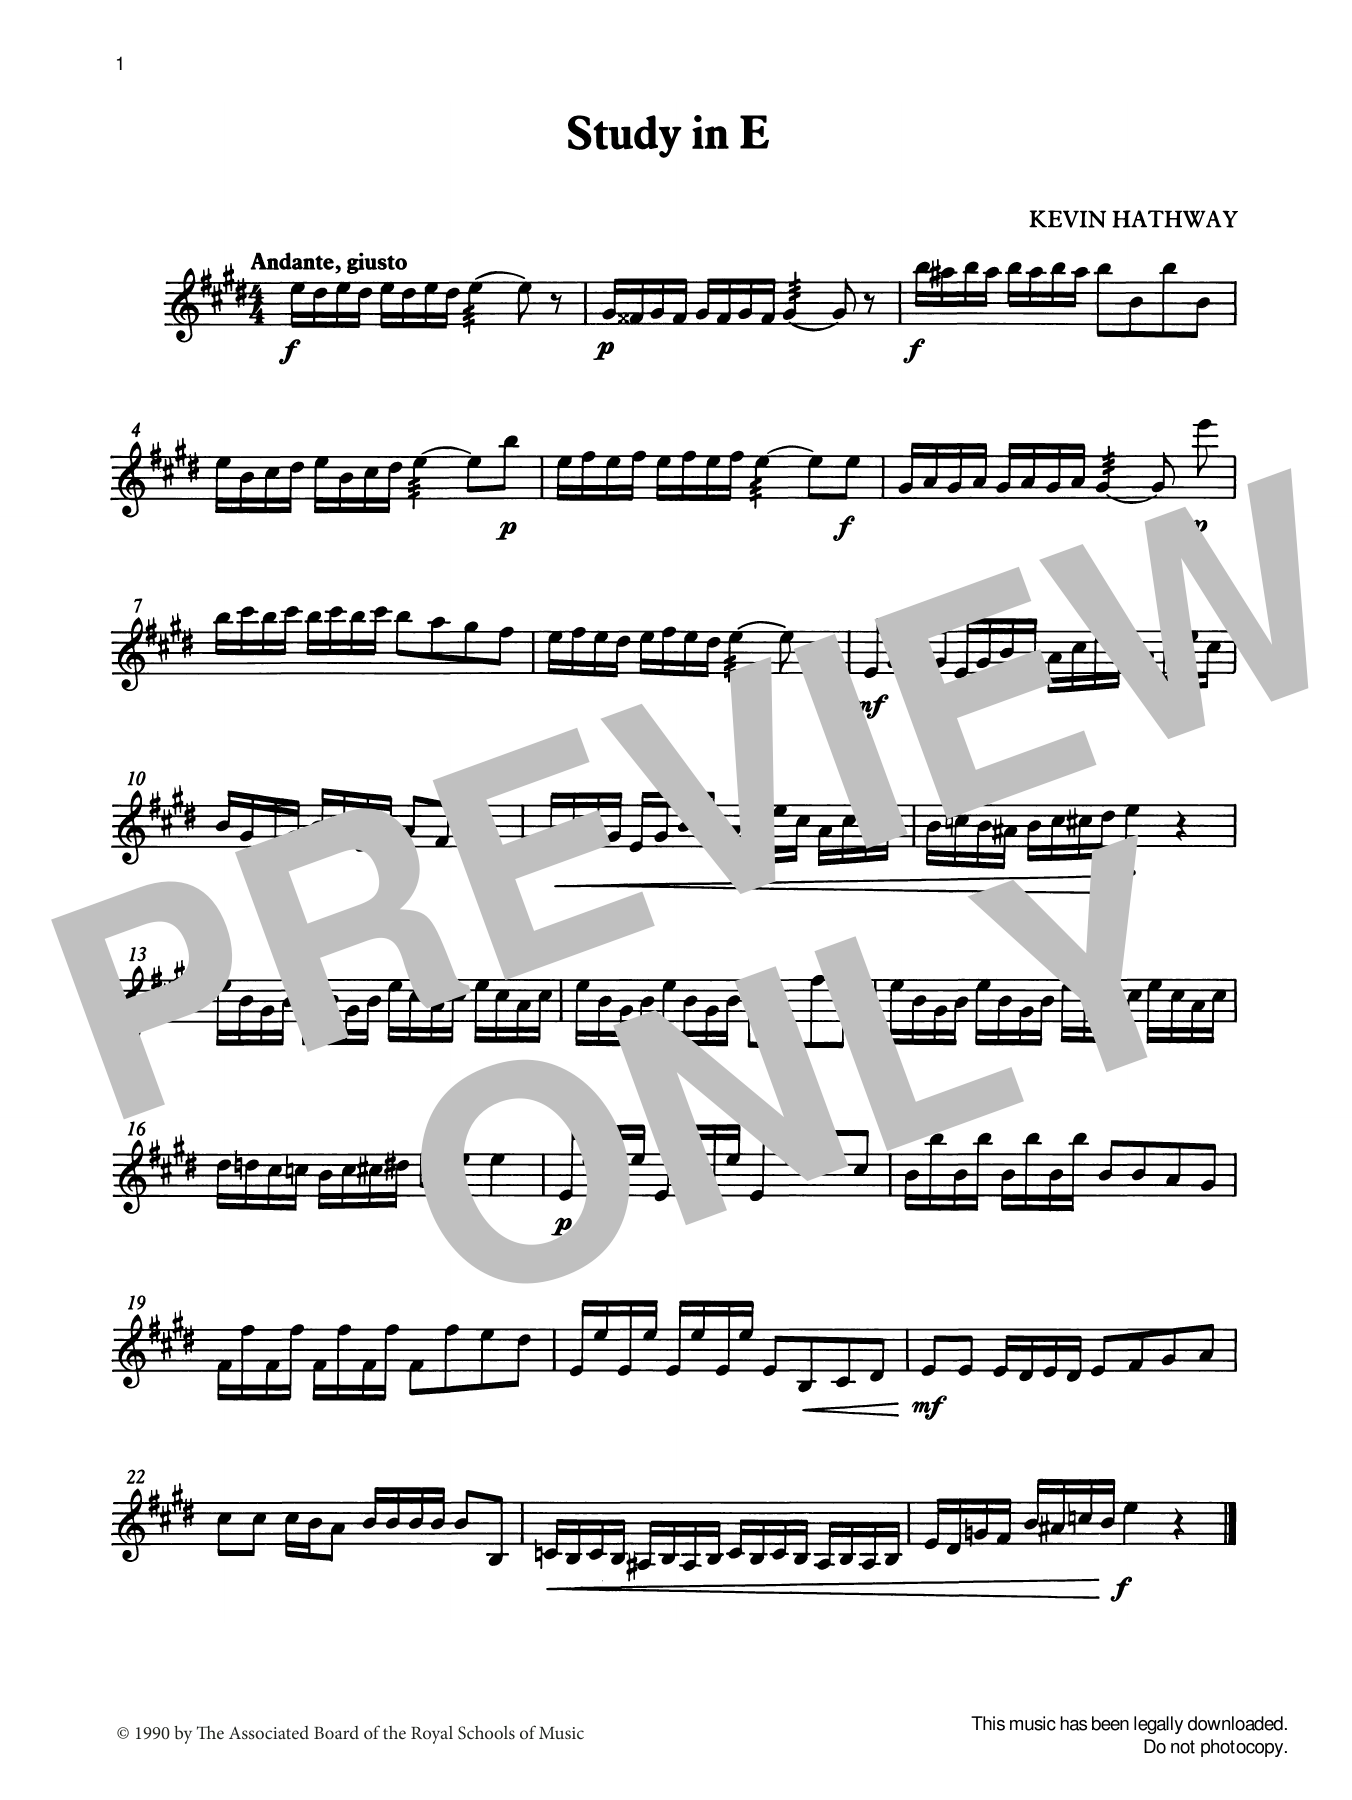 Study in E from Graded Music for Tuned Percussion, Book II (Percussion Solo) von Ian Wright and Kevin Hathaway